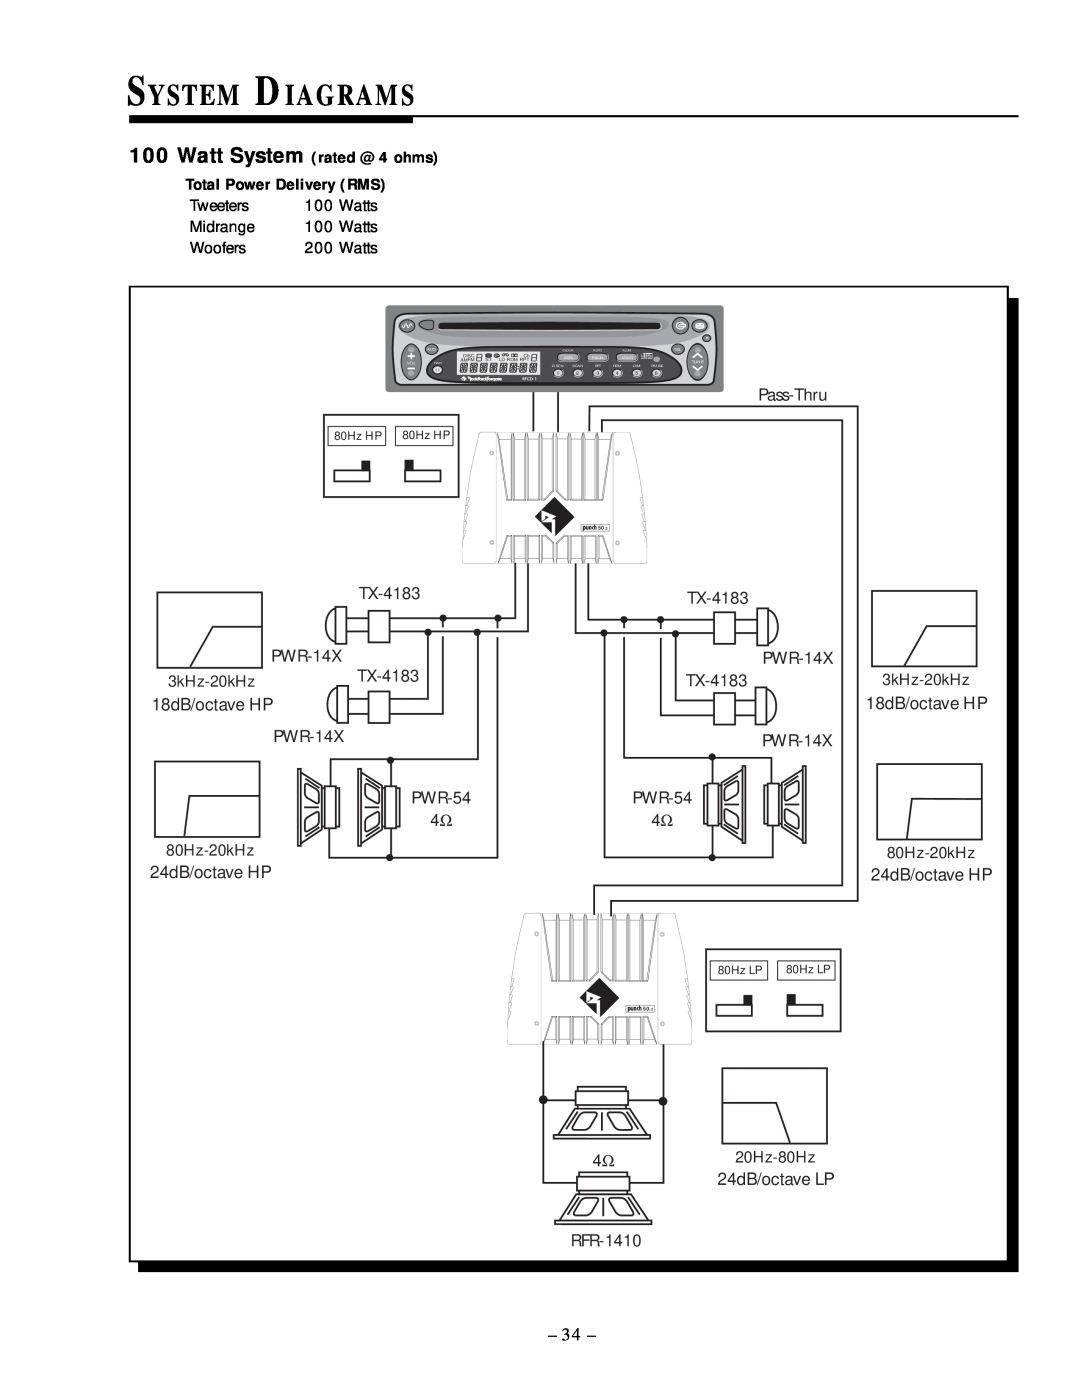 Rockford Fosgate 50.1, 50.2 manual System Diagrams, Watt System rated @ 4 ohms, Total Power Delivery RMS 